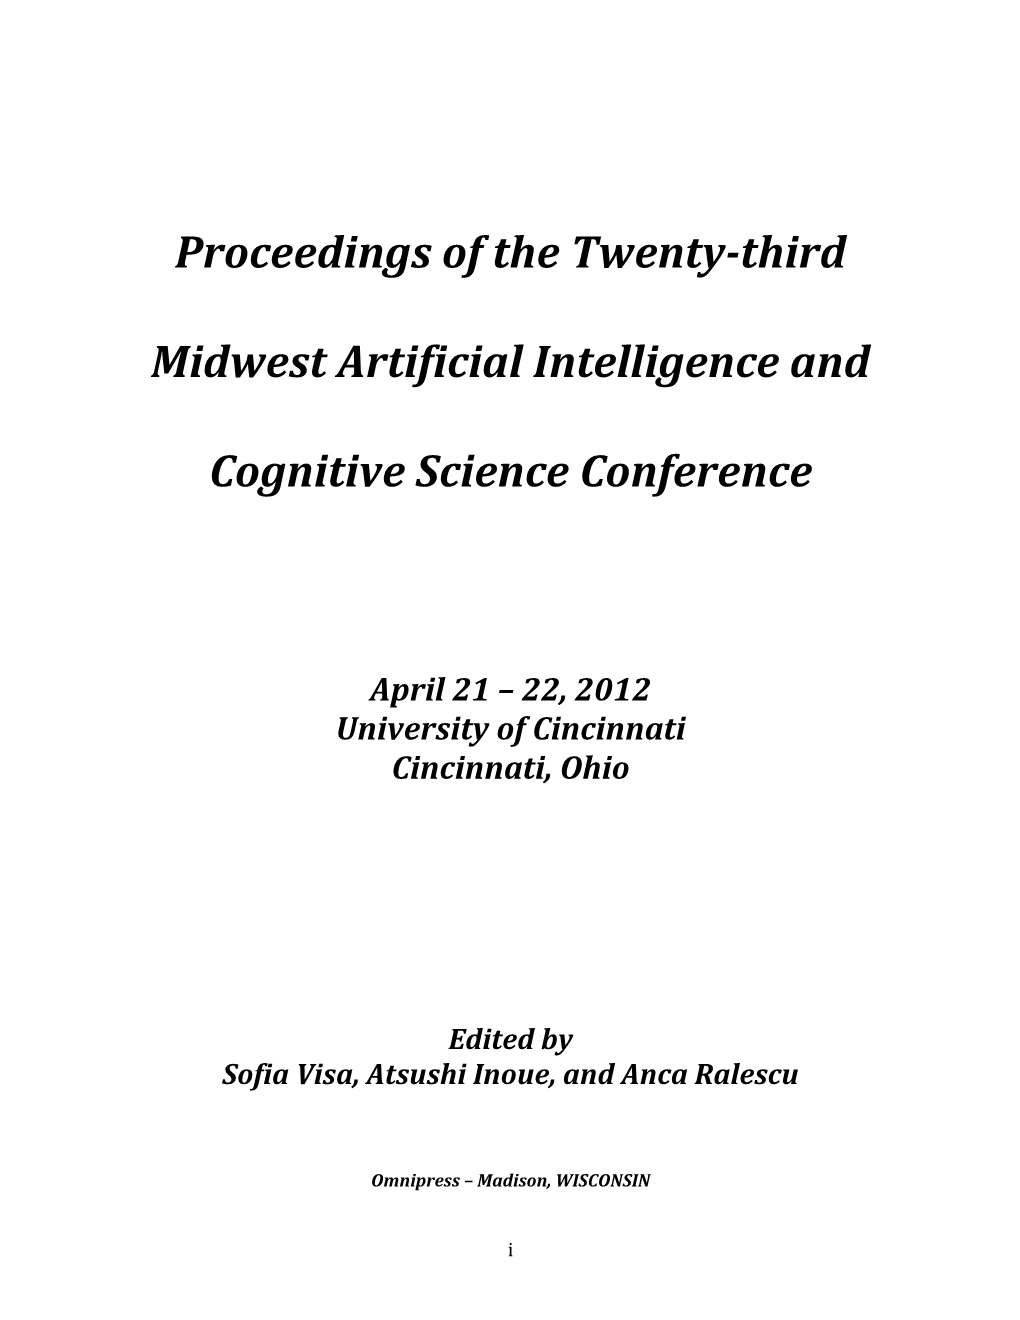 Proceedings of the Twenty-Third Midwest Artificial Intelligence and Cognitive Science Conference